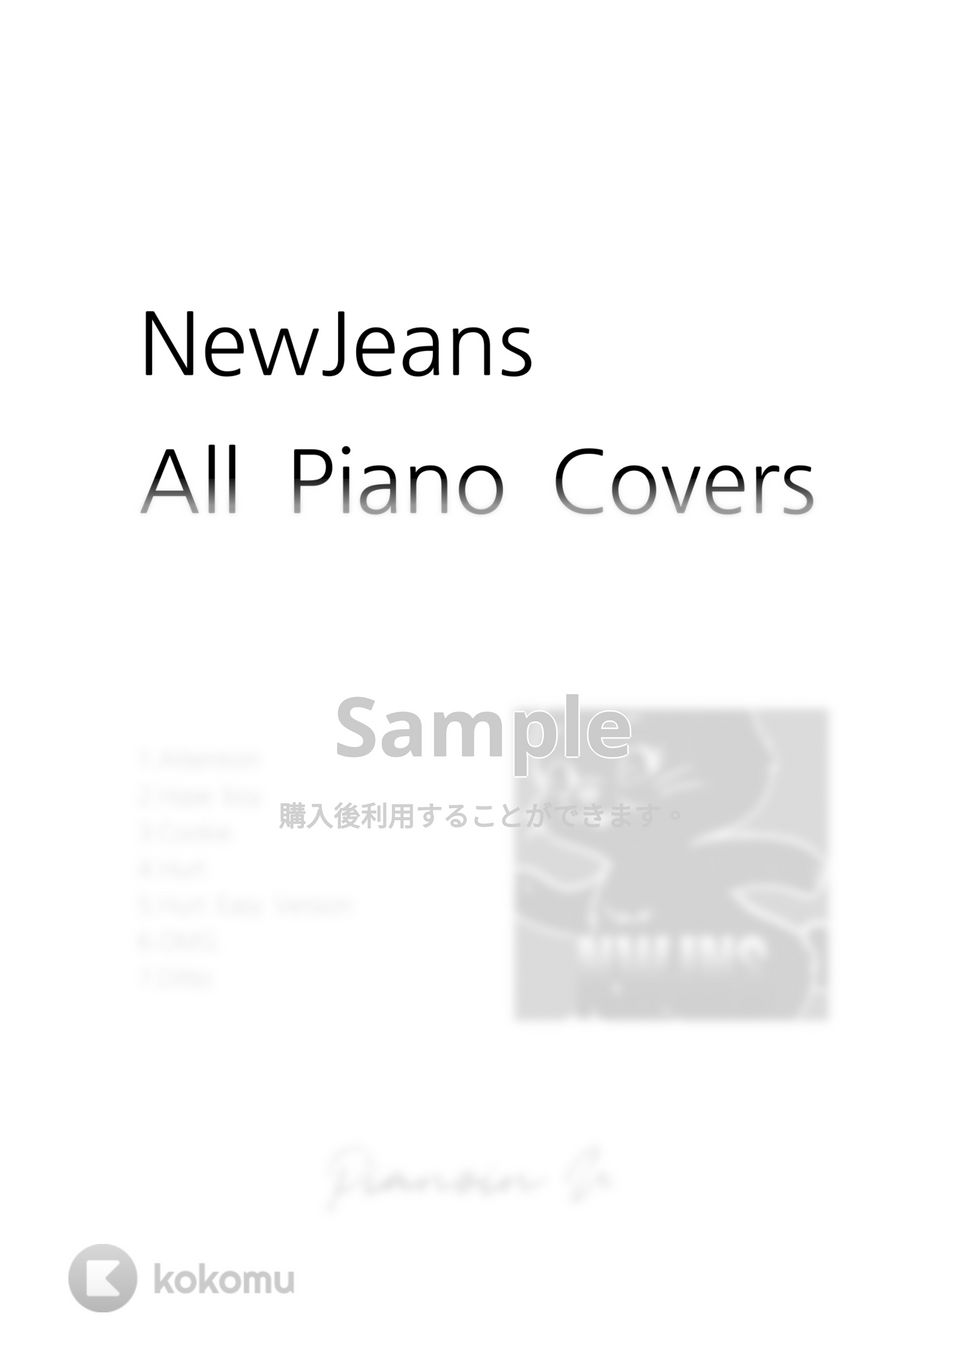 New Jeans - New Jeans 7曲メドレー by PIANOiNU